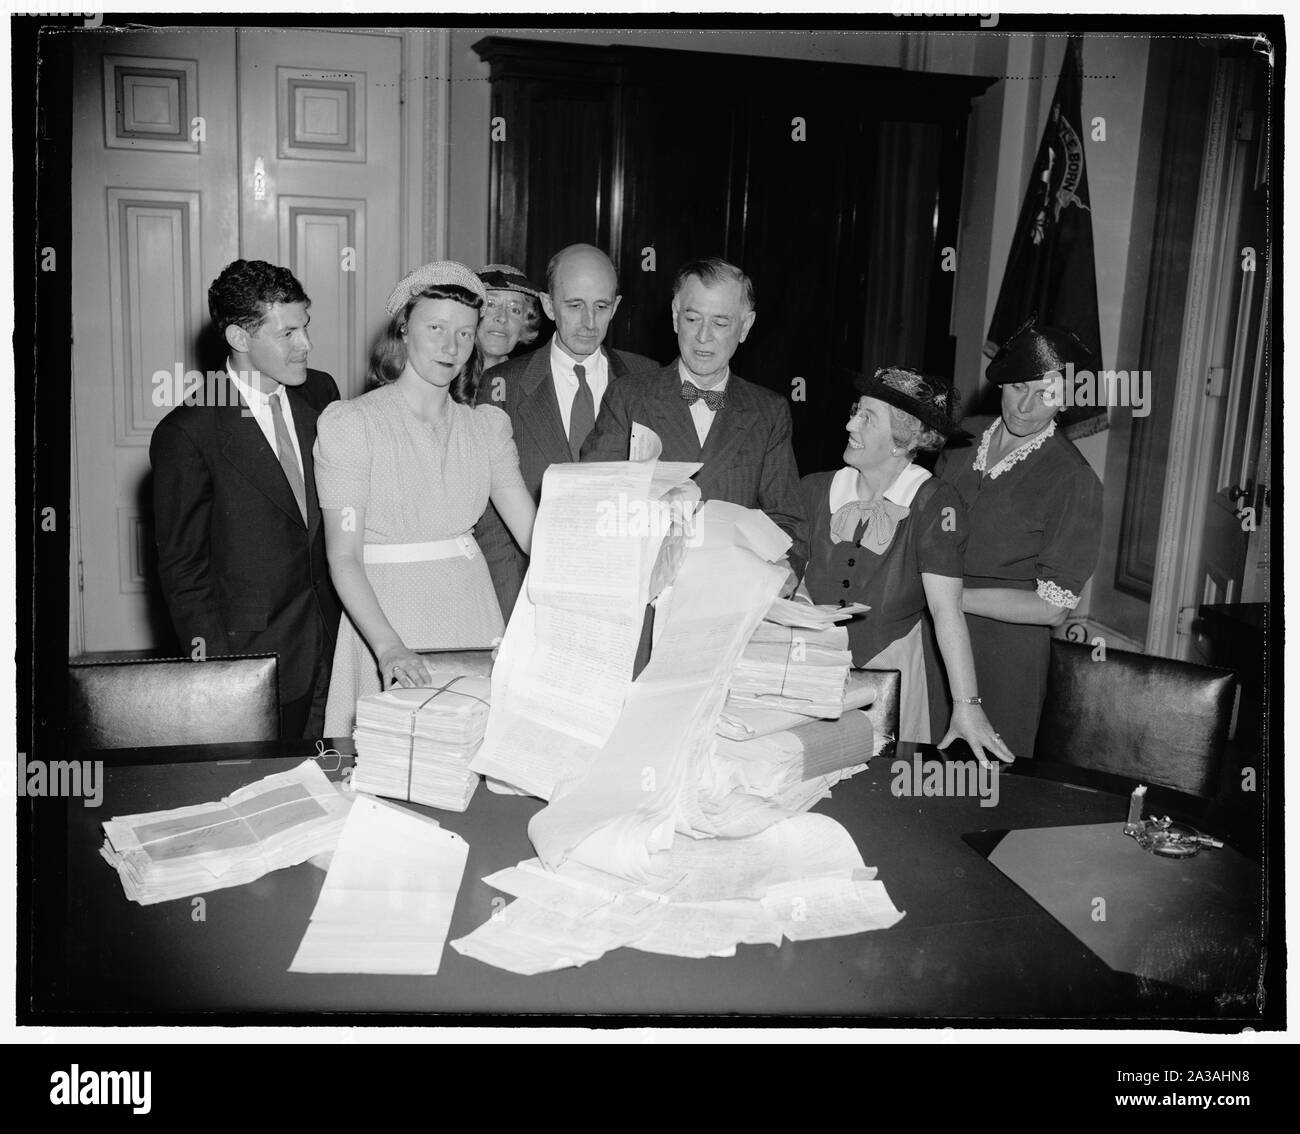 Senator Pittman gets petition urging embargos against Japan. Washington, D.C., July 18. A delegation representing the American Committee for non-participation in Japanese agression, headed by Eleanor Fabyan of Boston, called on Senator Key Pittman, Chairman of the Senate Foreign Relations Committee, this afternoon to present petitions urging embargoes against Japan. Miss Fabyan said the petitions were signed by 300,000 persons. Left to right: Gabriel Lasker, Cambridge; Gertrude Ely, Phila., PA; Eleanor Fabyan, Boston, Mass.; Dr. Roger Greene; Senator Pittman; Mrs. George Fitch, Pasadena, Cal.; Stock Photo